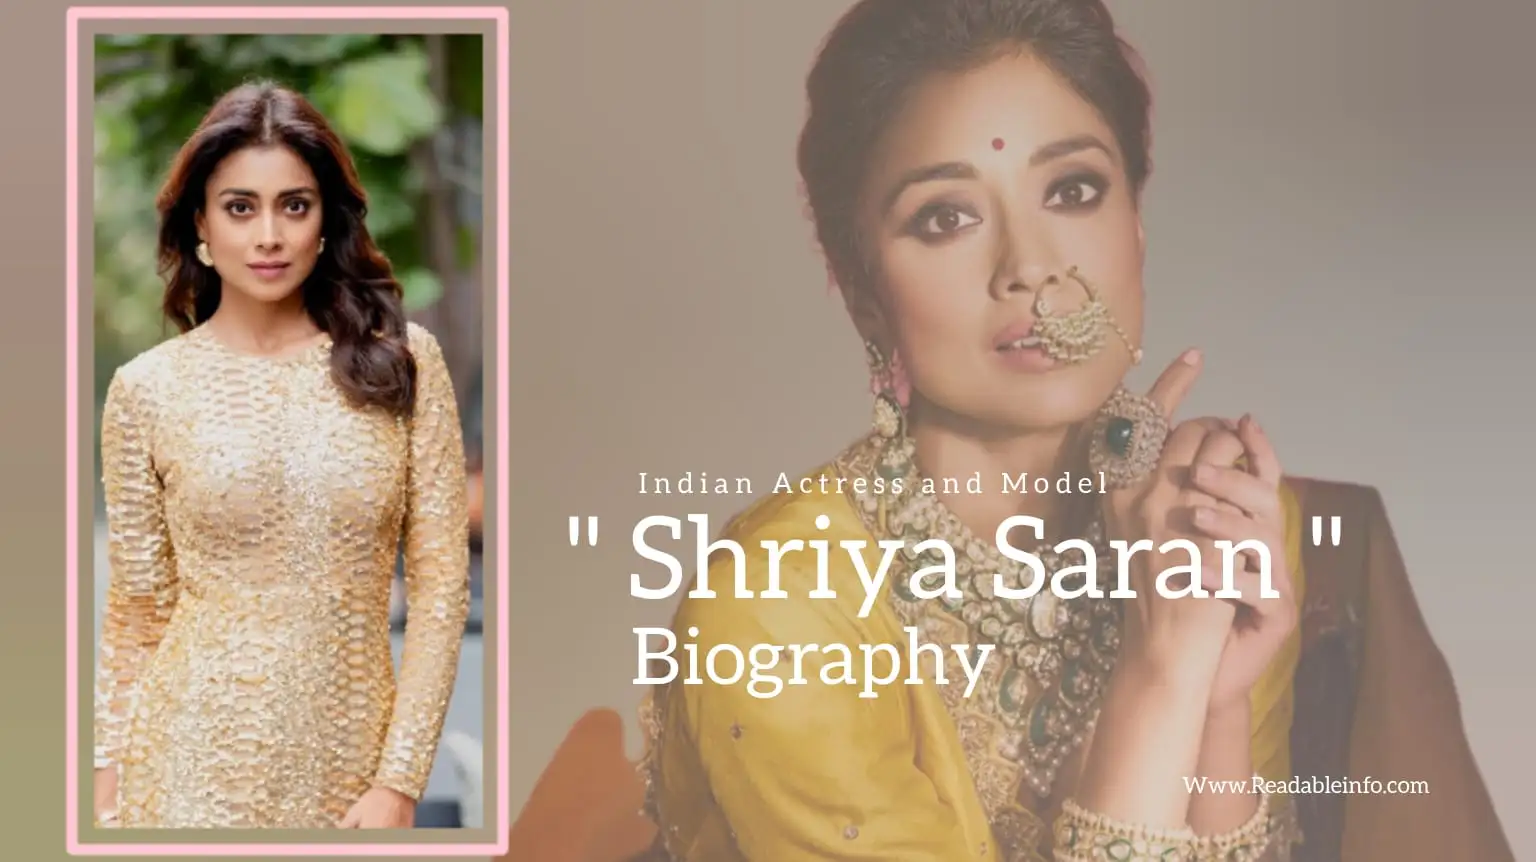 You are currently viewing Shriya Saran Biography (Indian Actress and Model)